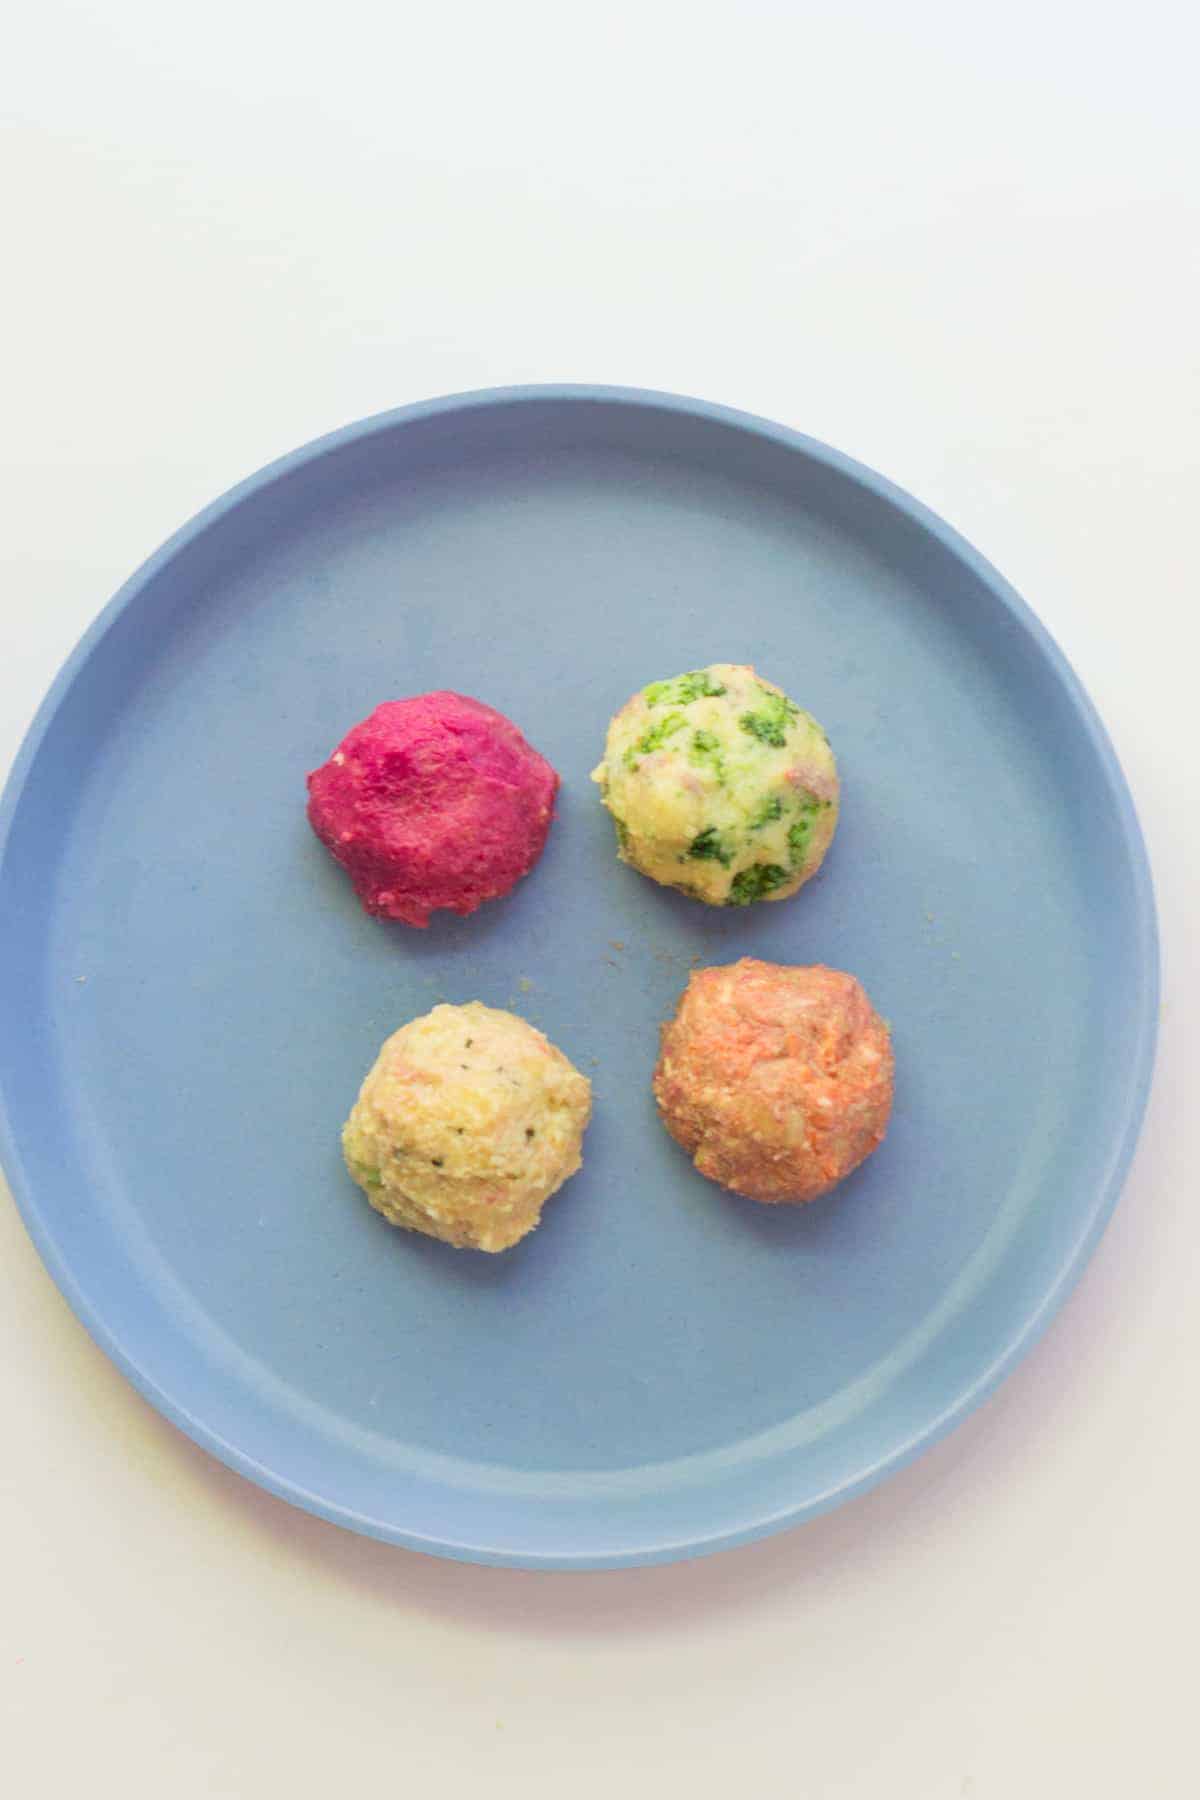 the four different variations of lentils shaped into balls and placed on a blue plate